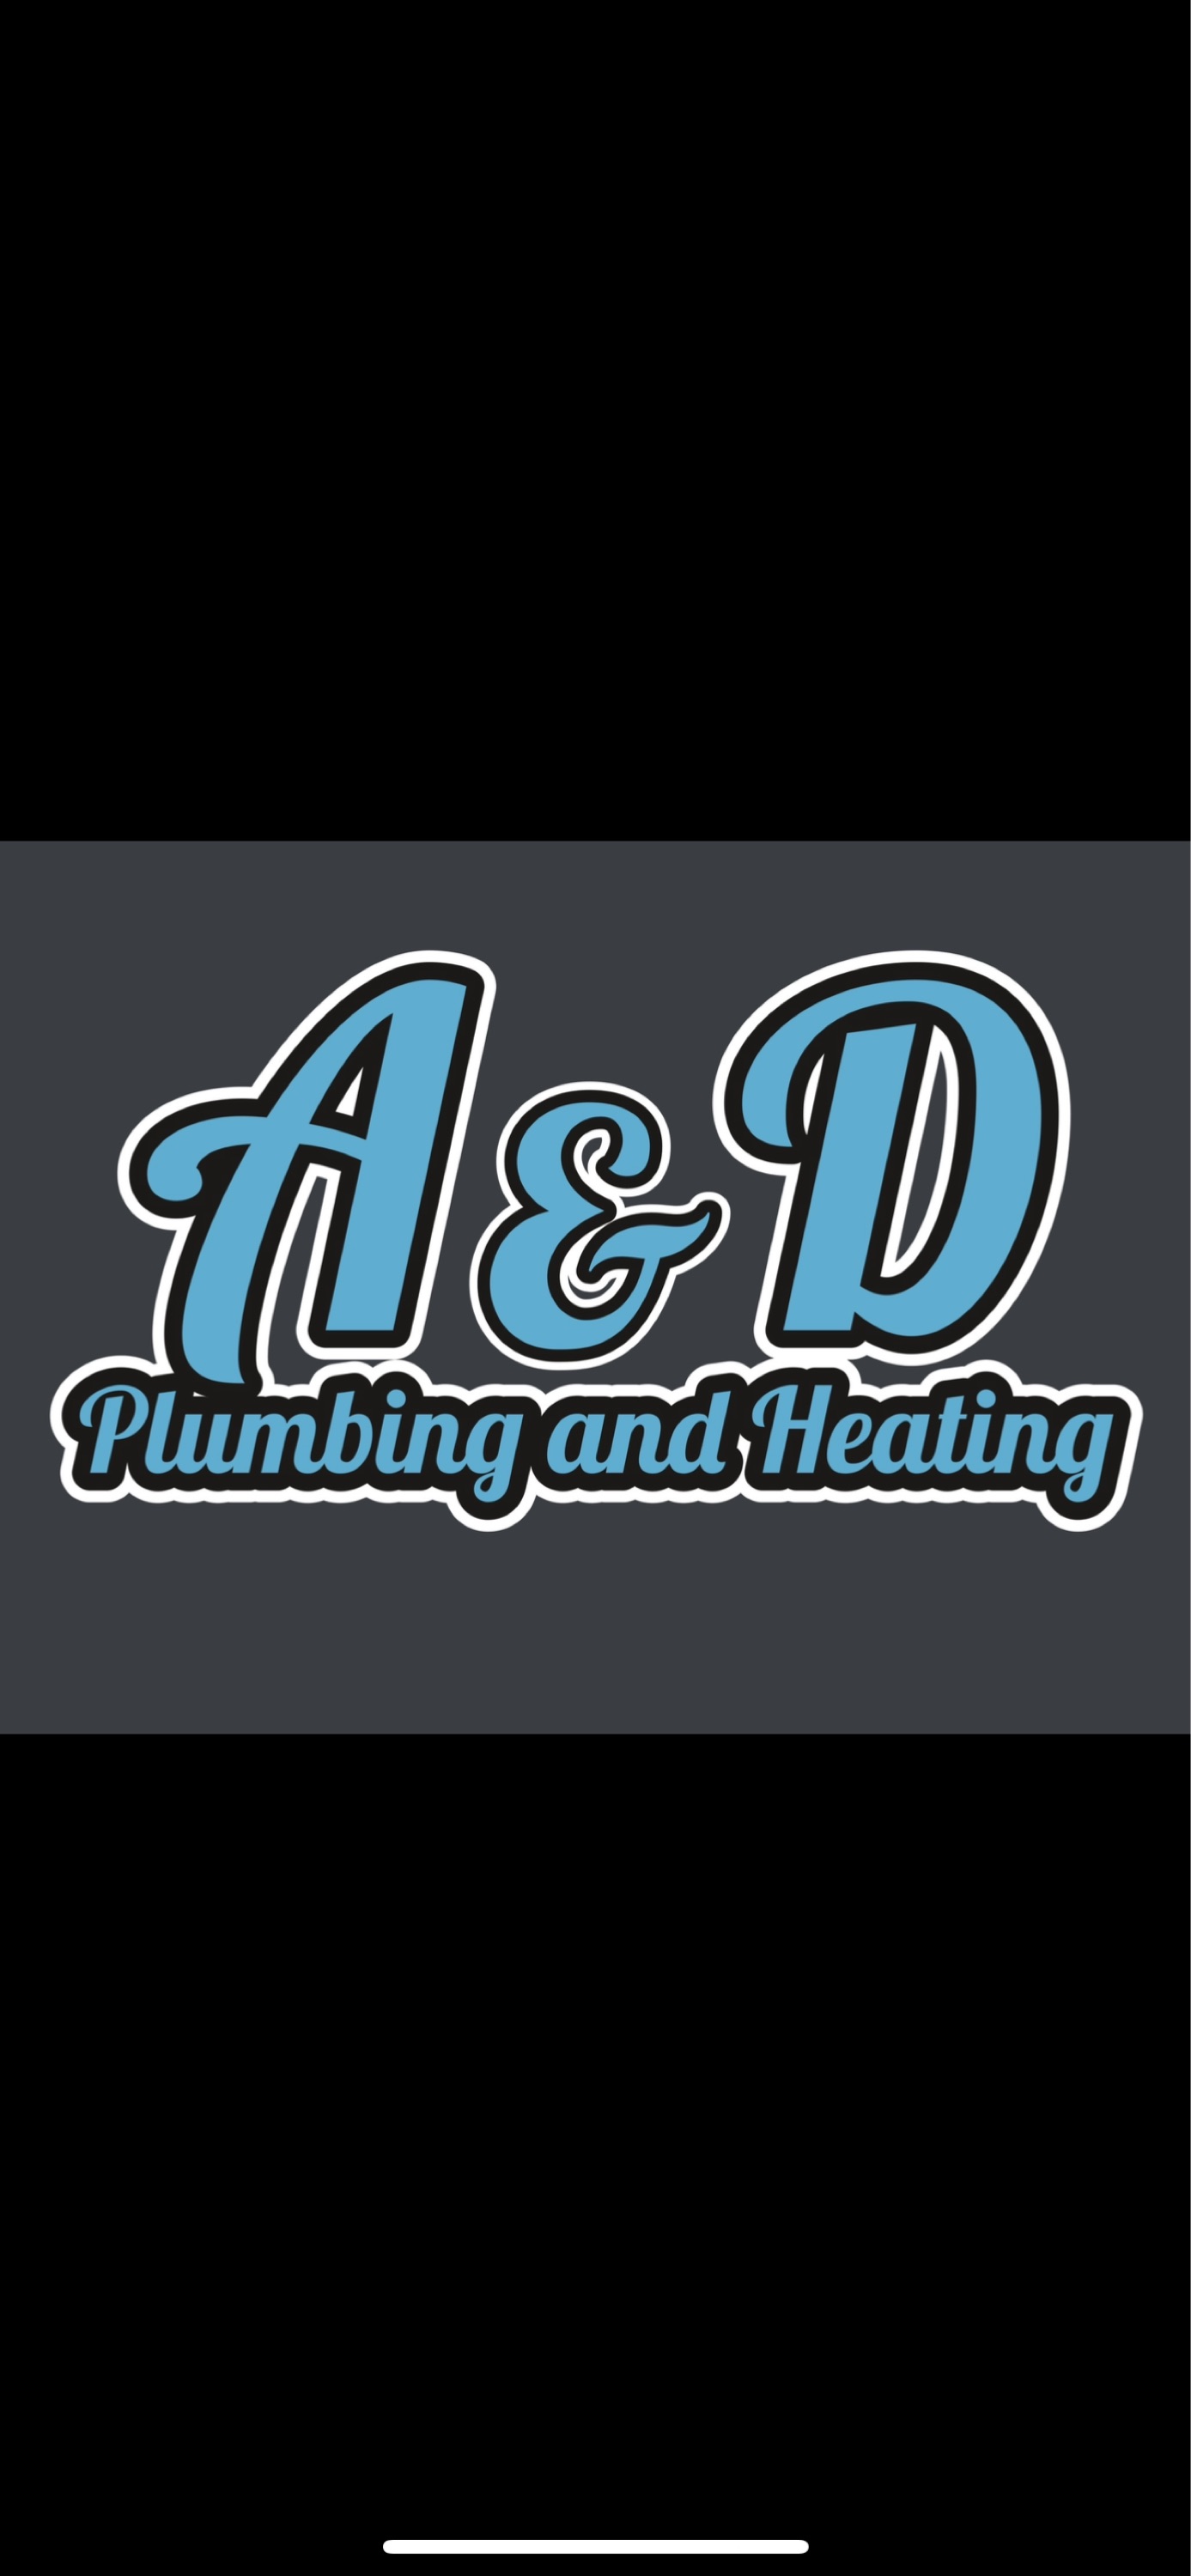 A&D Plumbing and Heating Logo